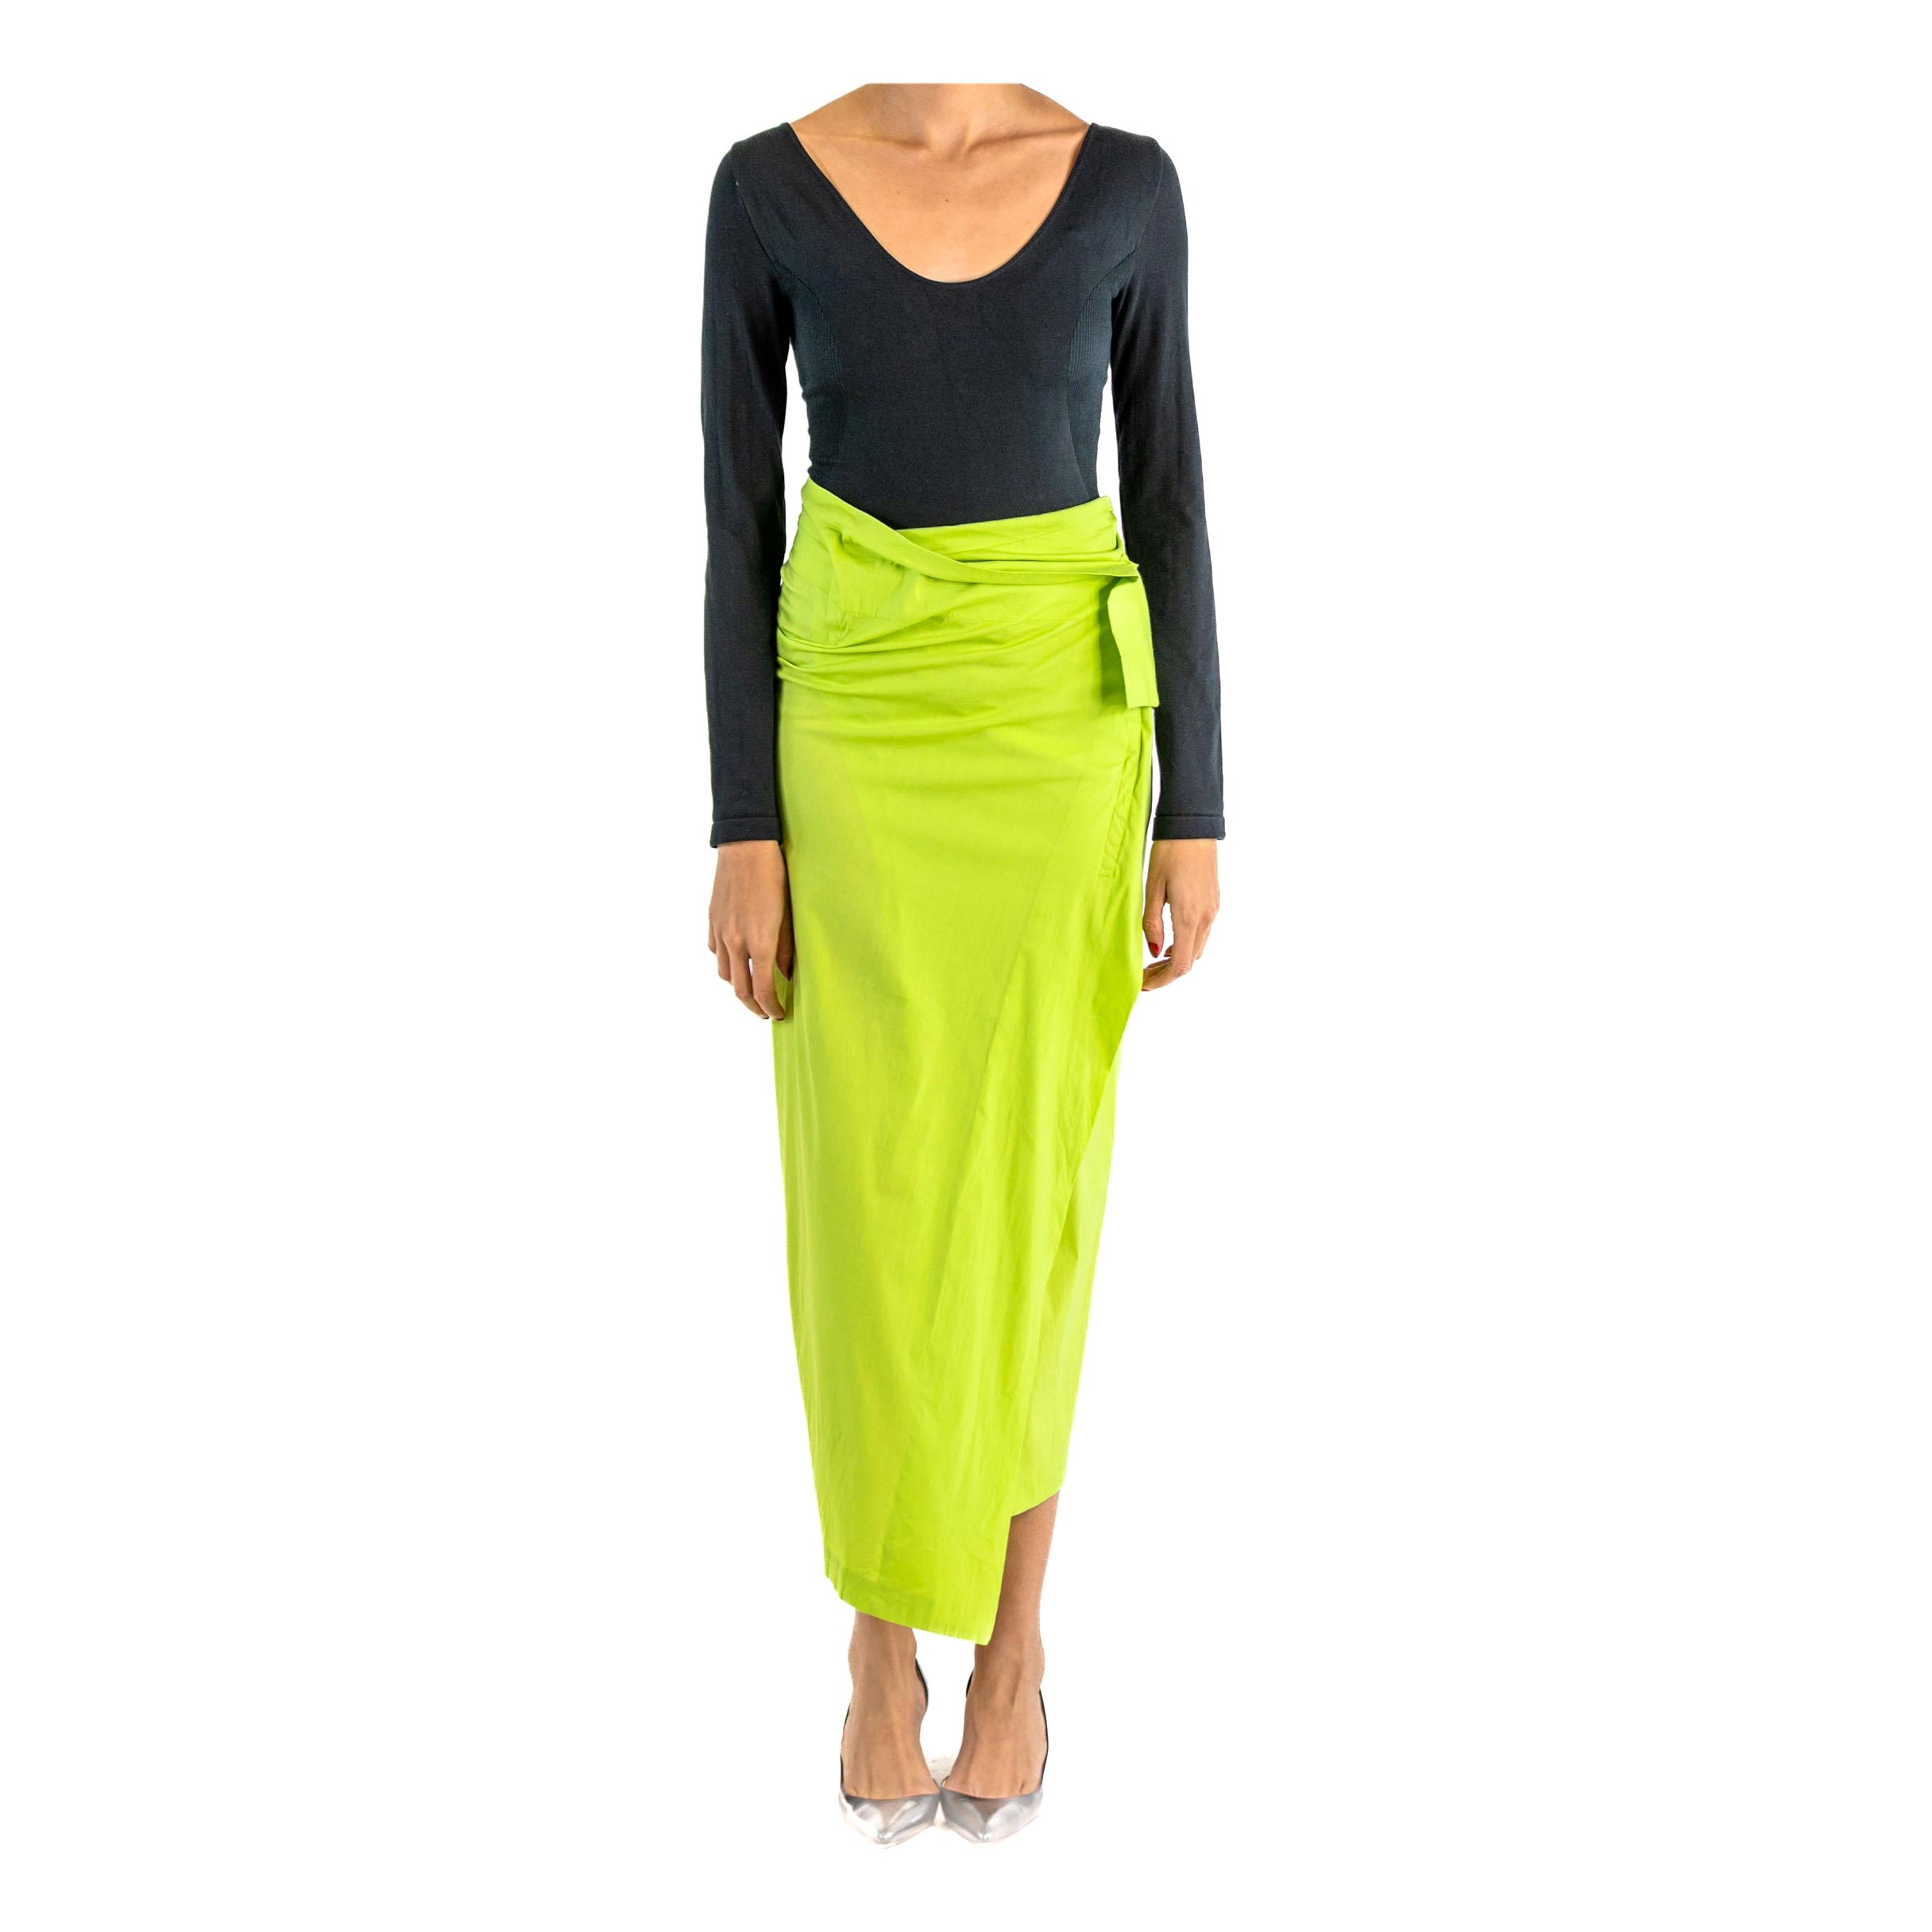 1990S ISSEY MIYAKE Lime Green & Black Rayon Blend Scoop Neck Top Skirt Ensemble For Sale